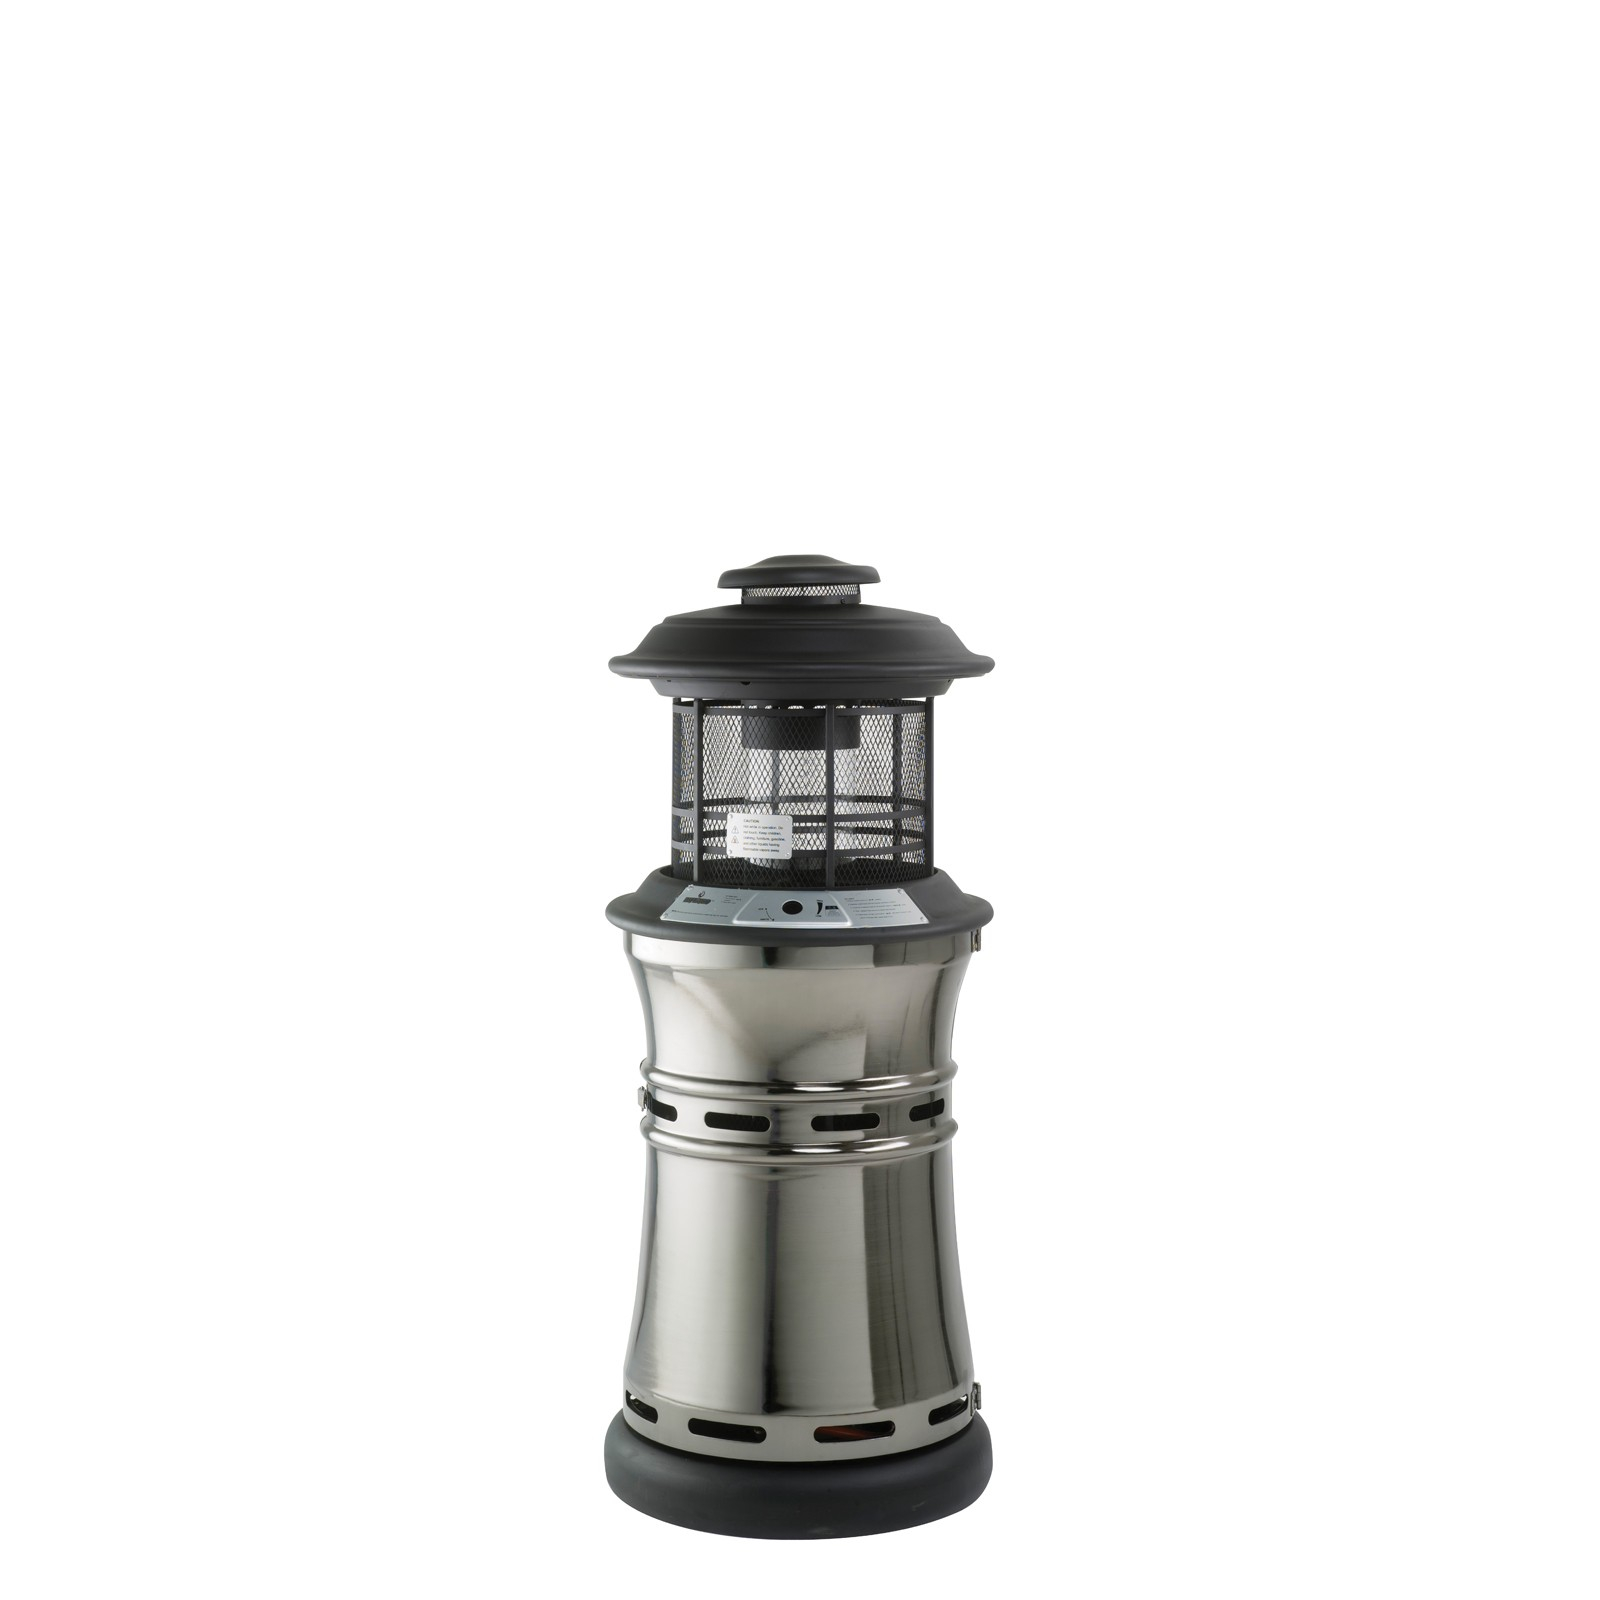 Lifestyle Santorini Gas Flame Patio Heater intended for proportions 1600 X 1600